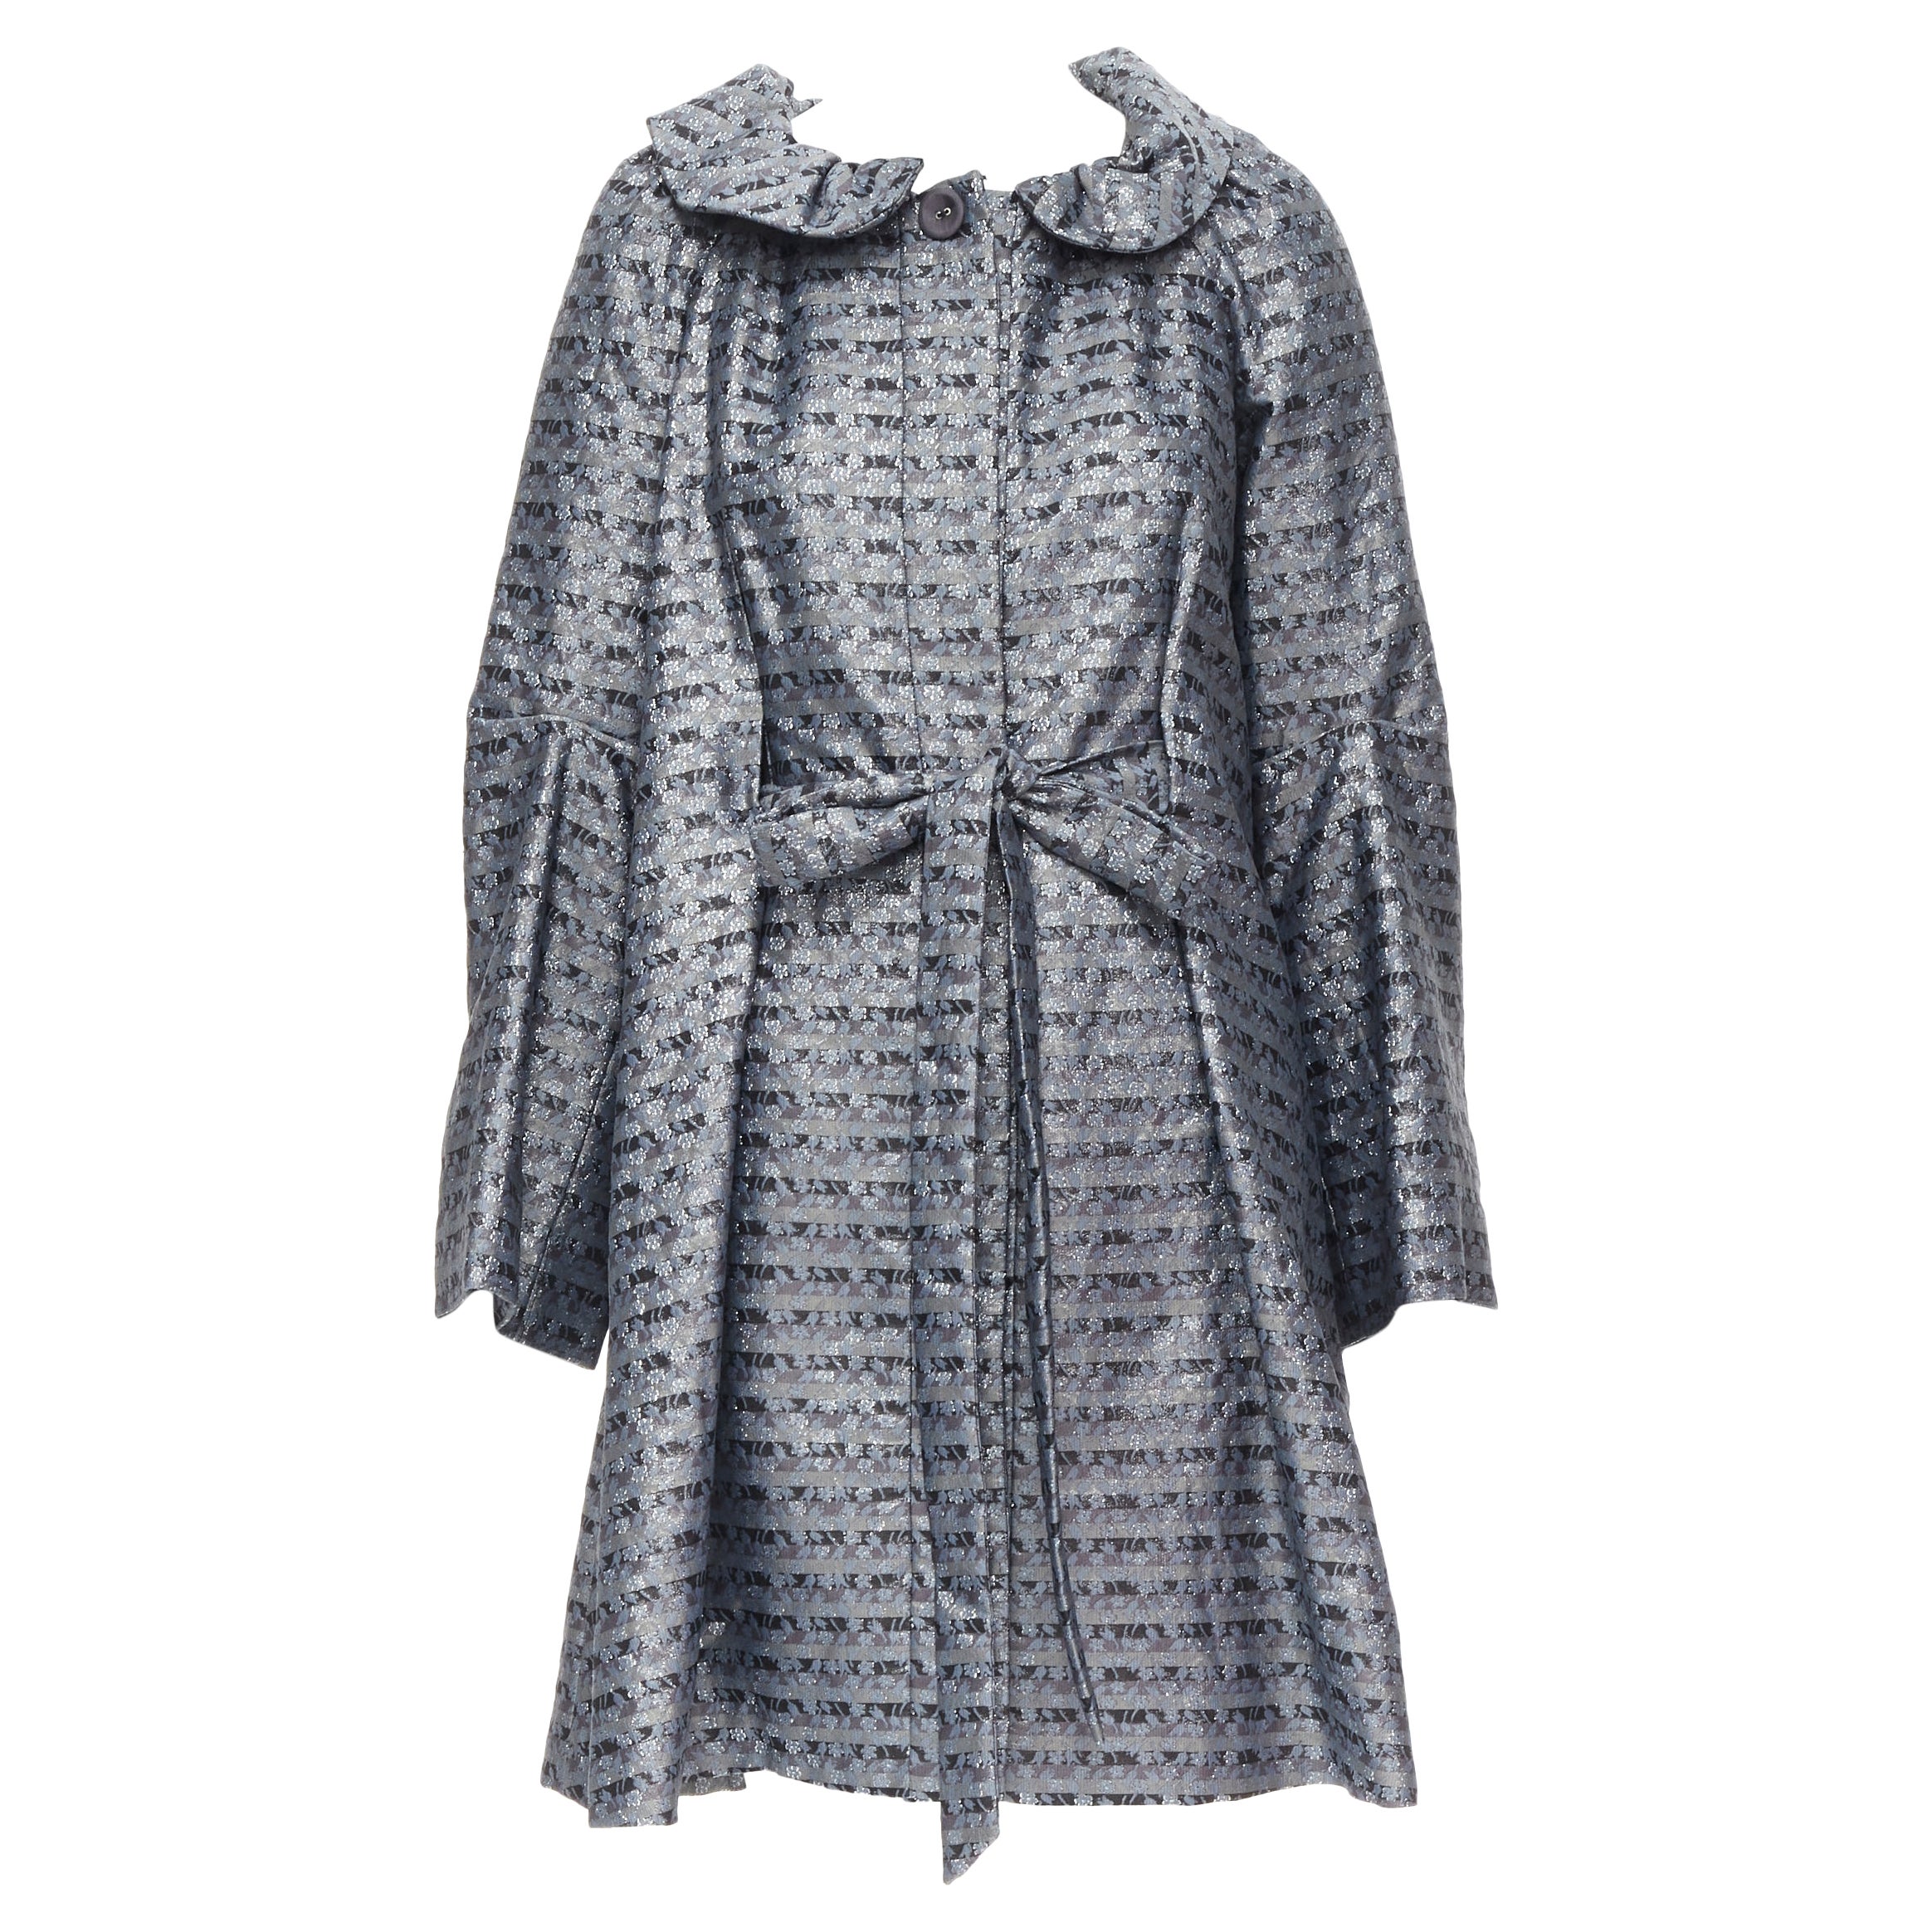 MARC JACOBS metallic blue floral jacquard belted front flared opera coat XS For Sale